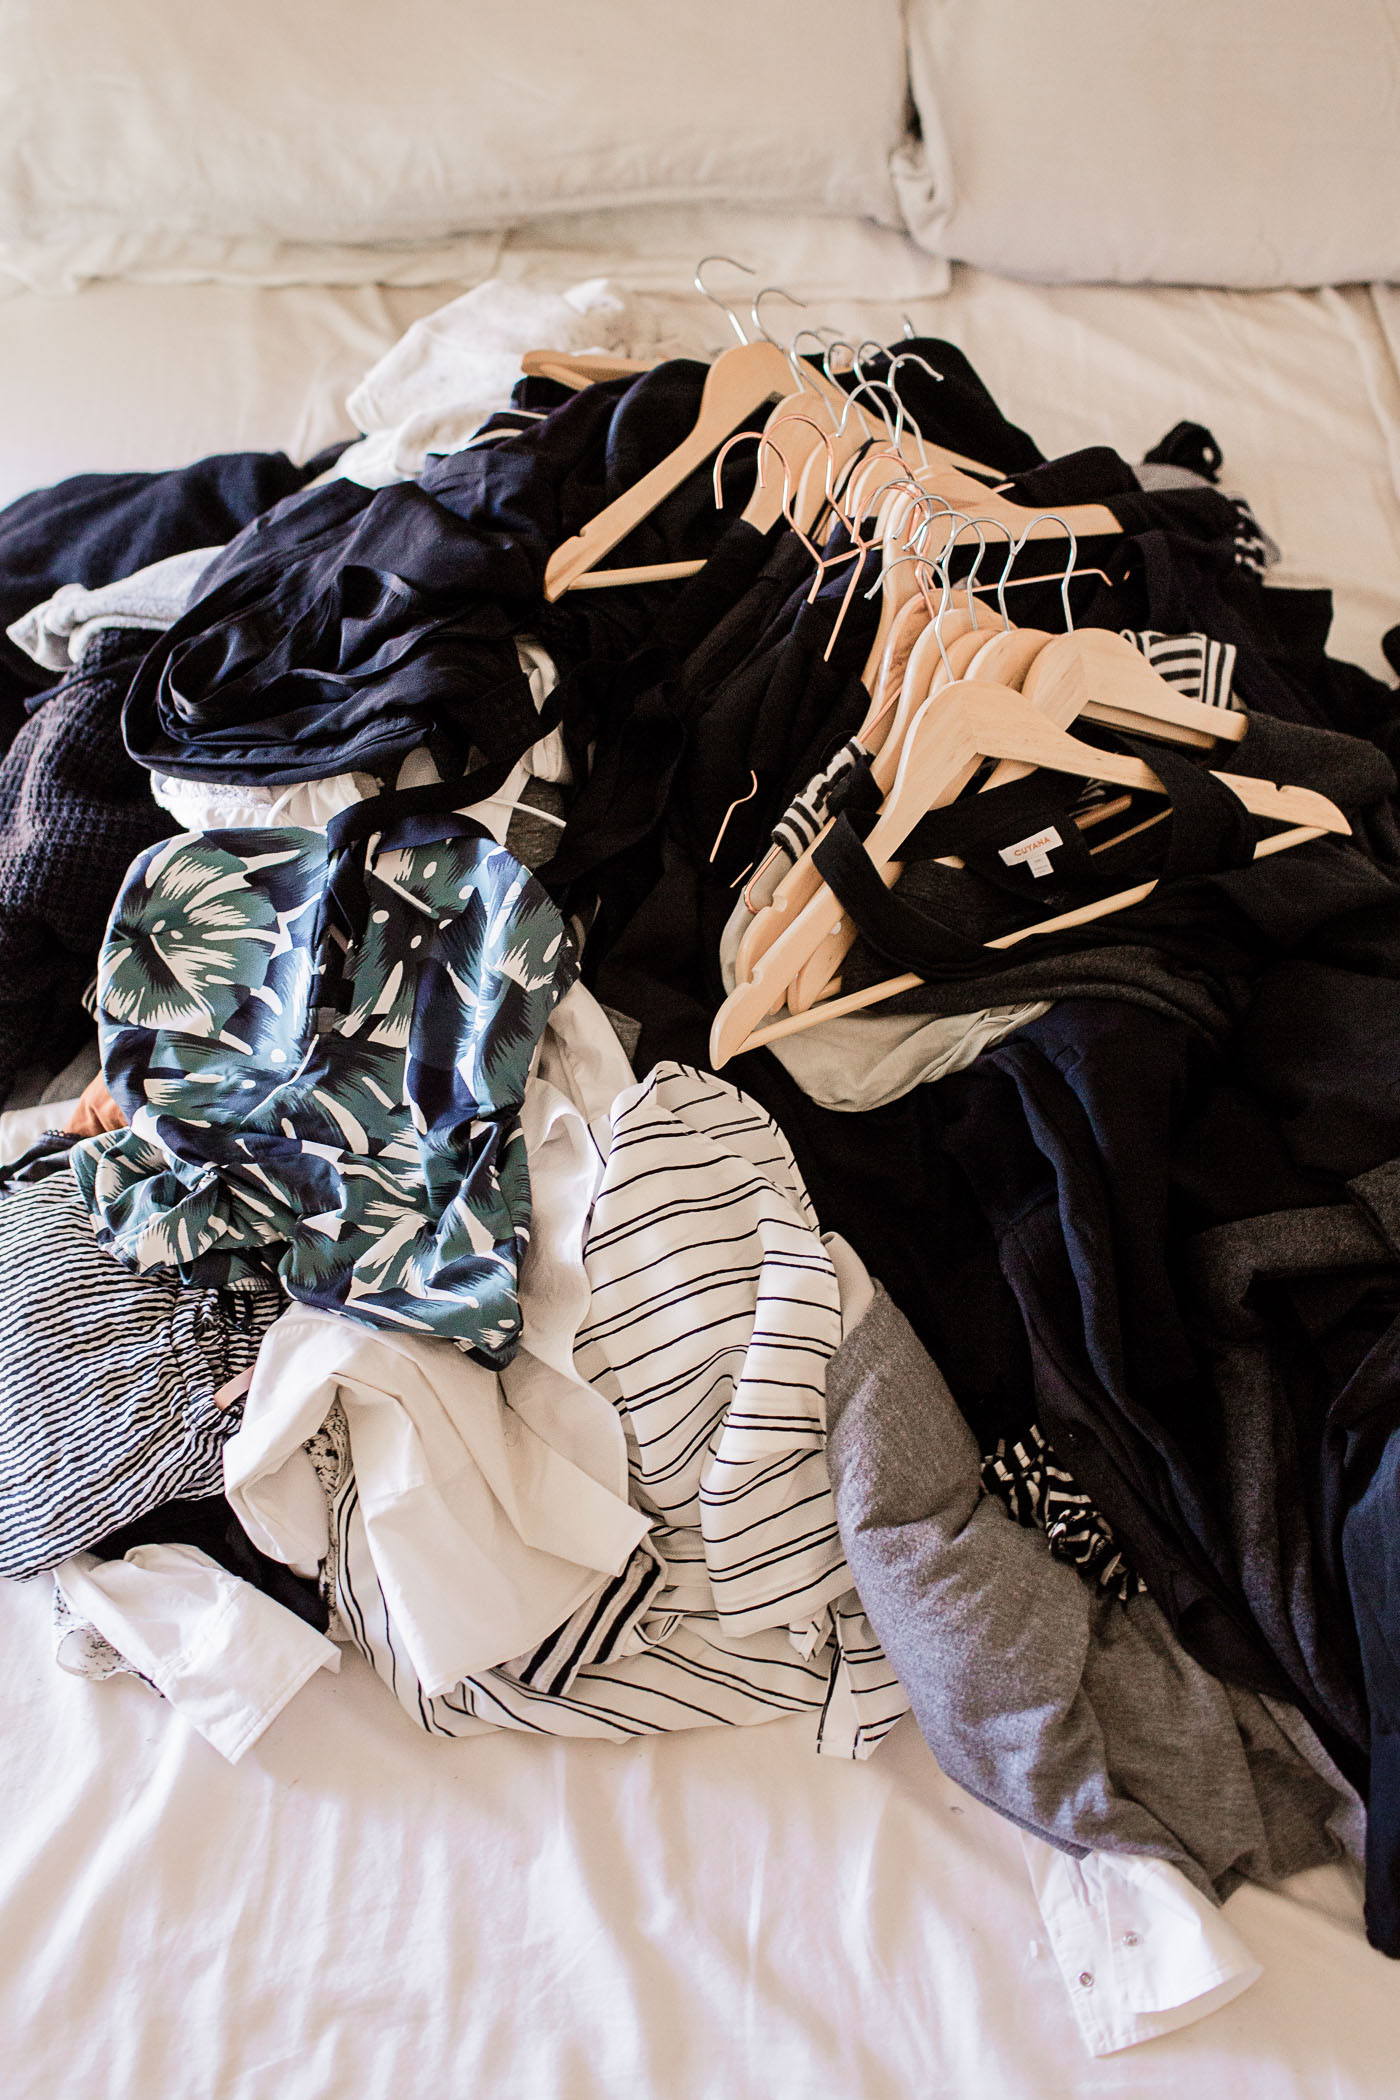 How to clean out your closet, plus the before photos!